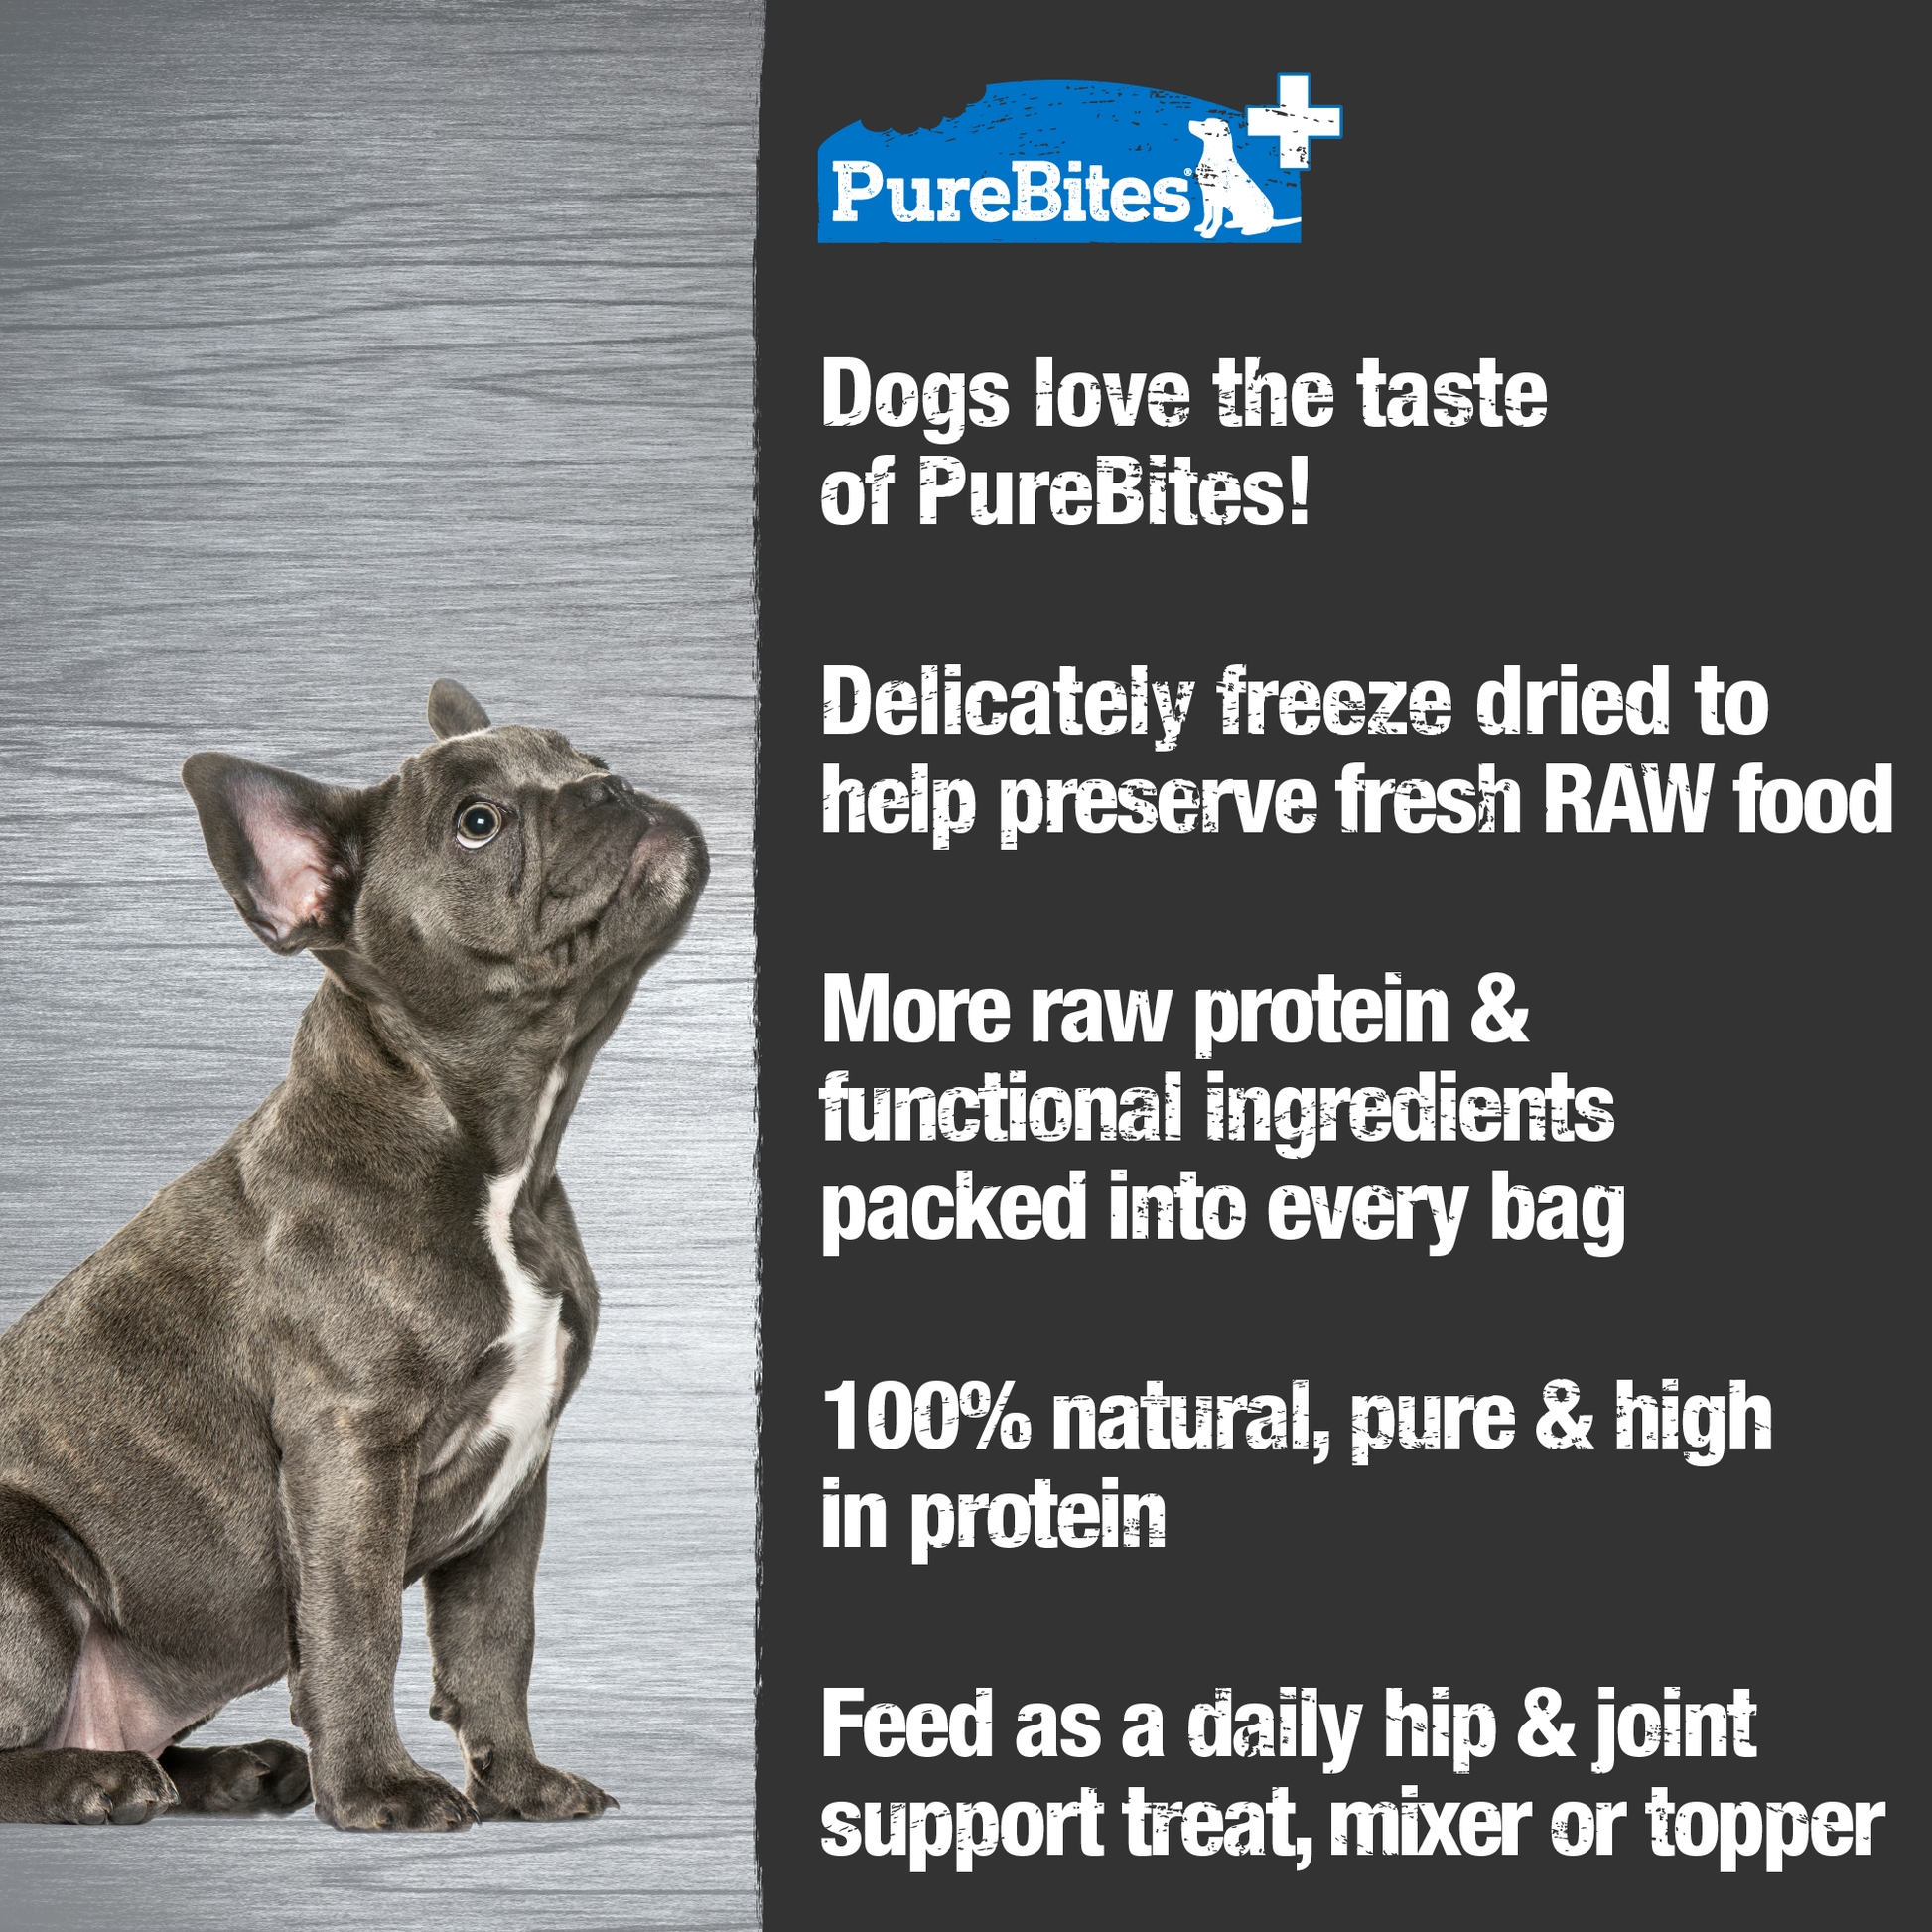 Made fresh & pure means more RAW protein and nutrients packed into every bag. Our hip & joint treats are freeze dried to help preserve its RAW taste, and nutrition, and mirror a dog’s ancestral diet